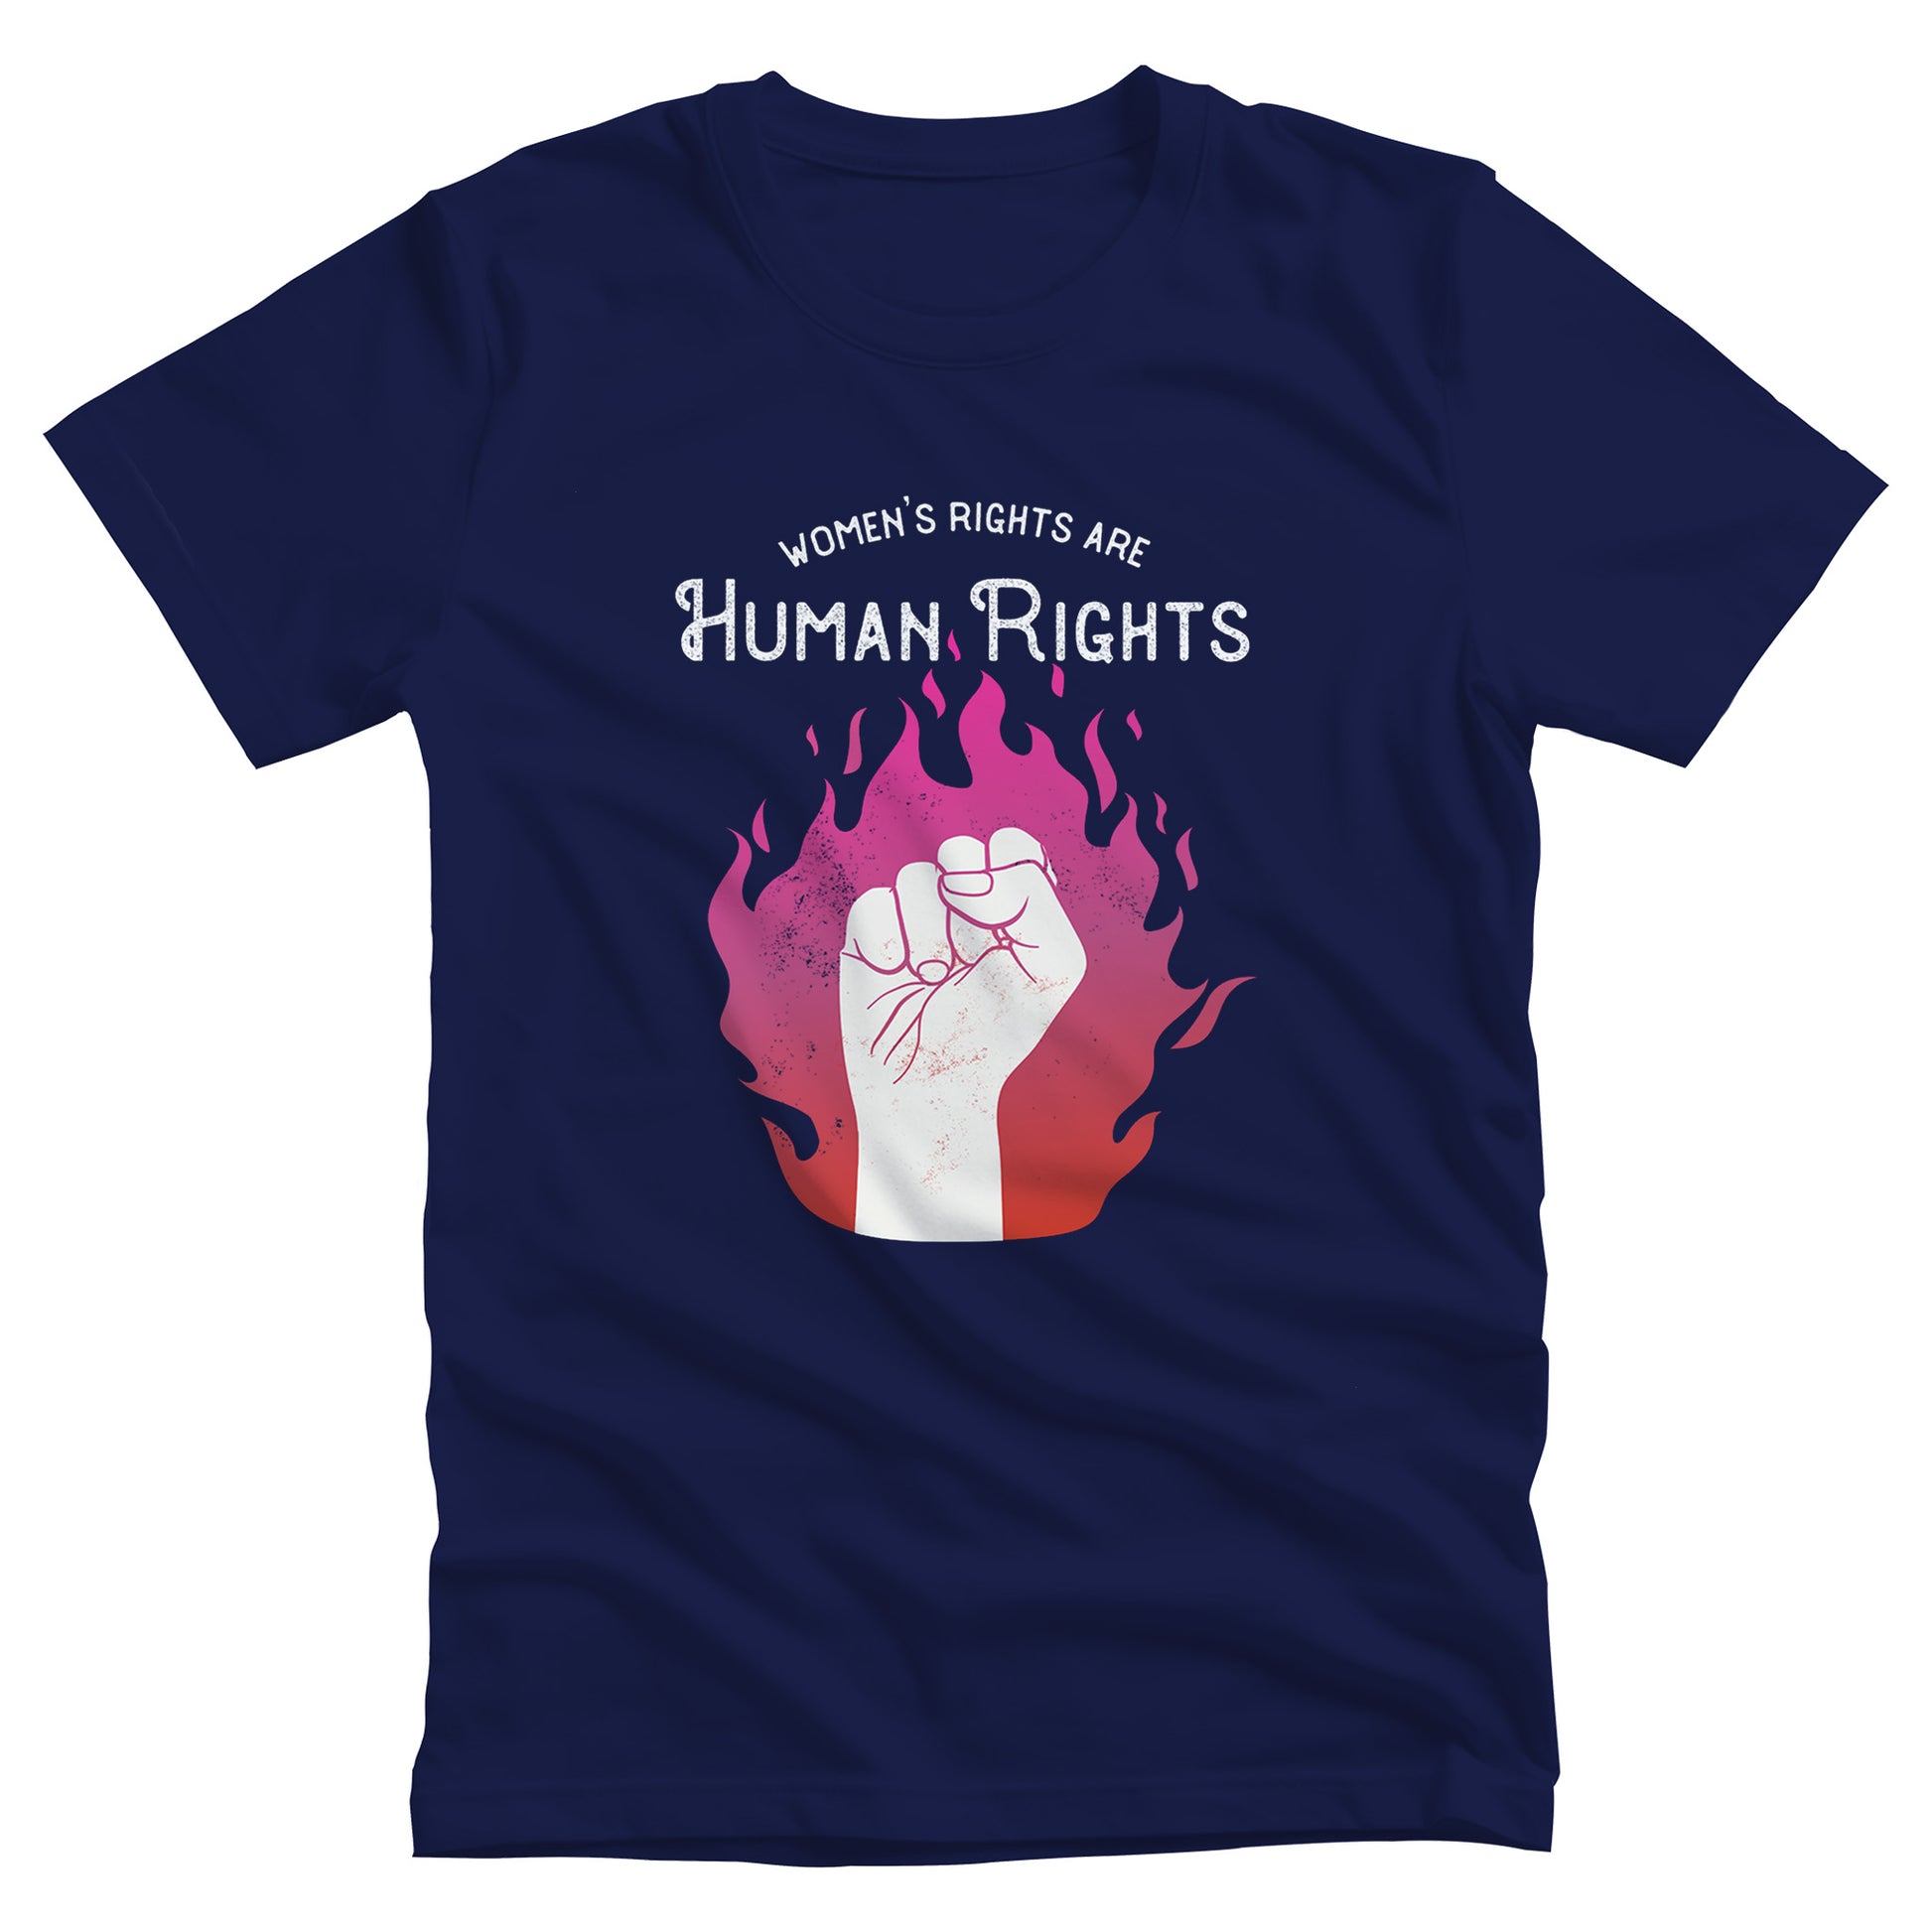 Navy Blue unisex t-shirt with a graphic of a fist over pink and red flames. The text says, “Women’s rights are human rights” with the words “women’s rights are” arched over the words “Human Rights”.